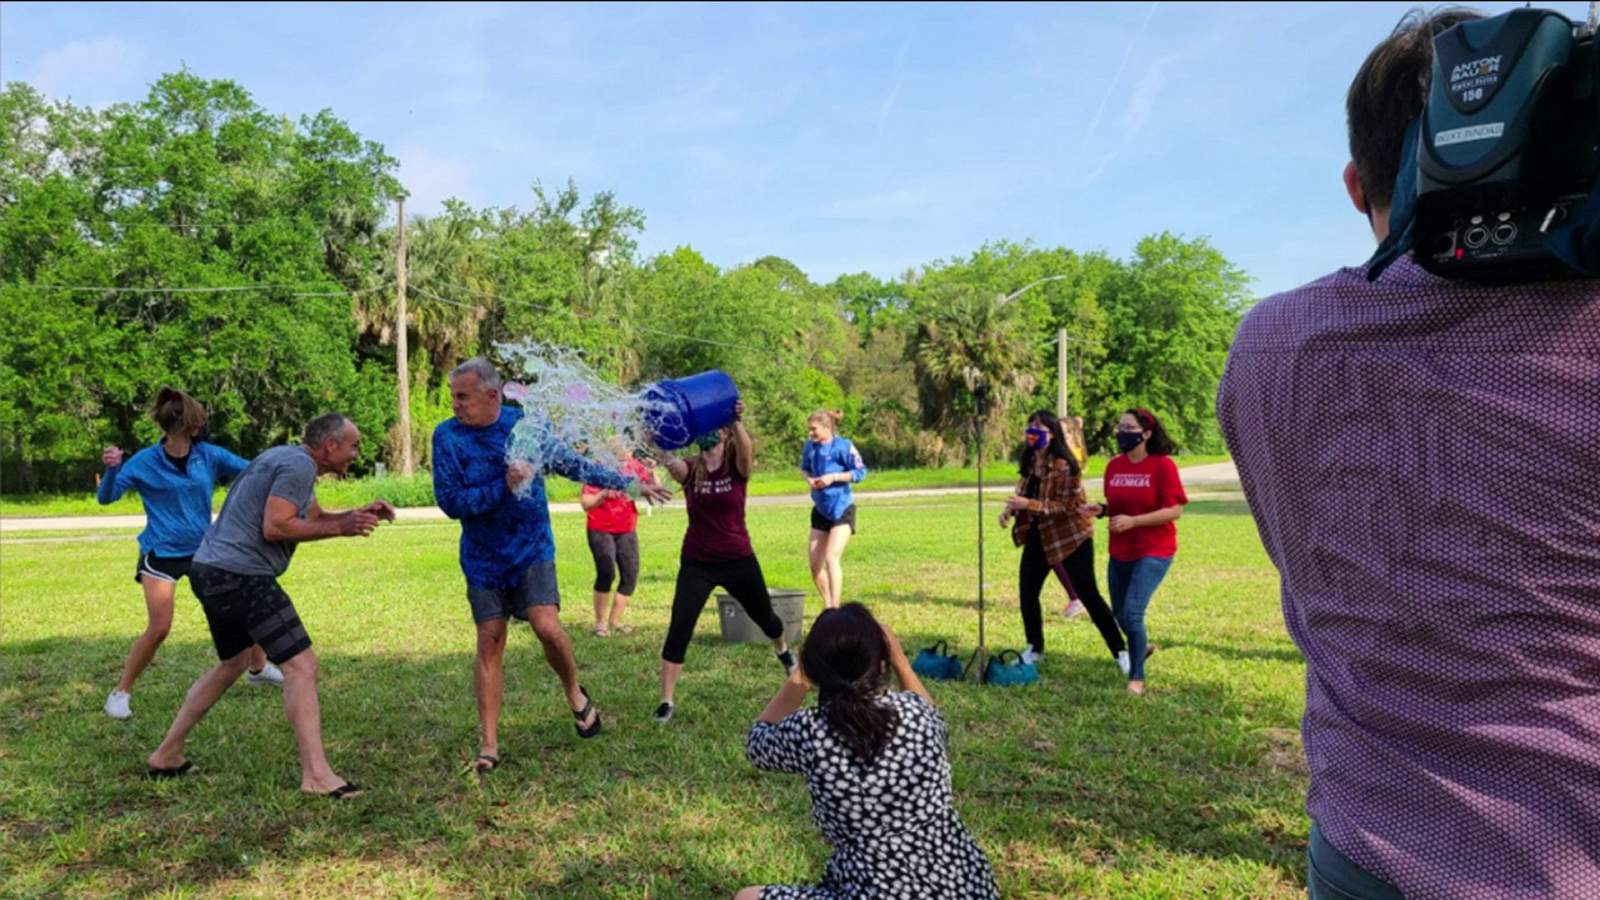 International Have Fun At Work Day: News4Jax celebrates with water balloon fight